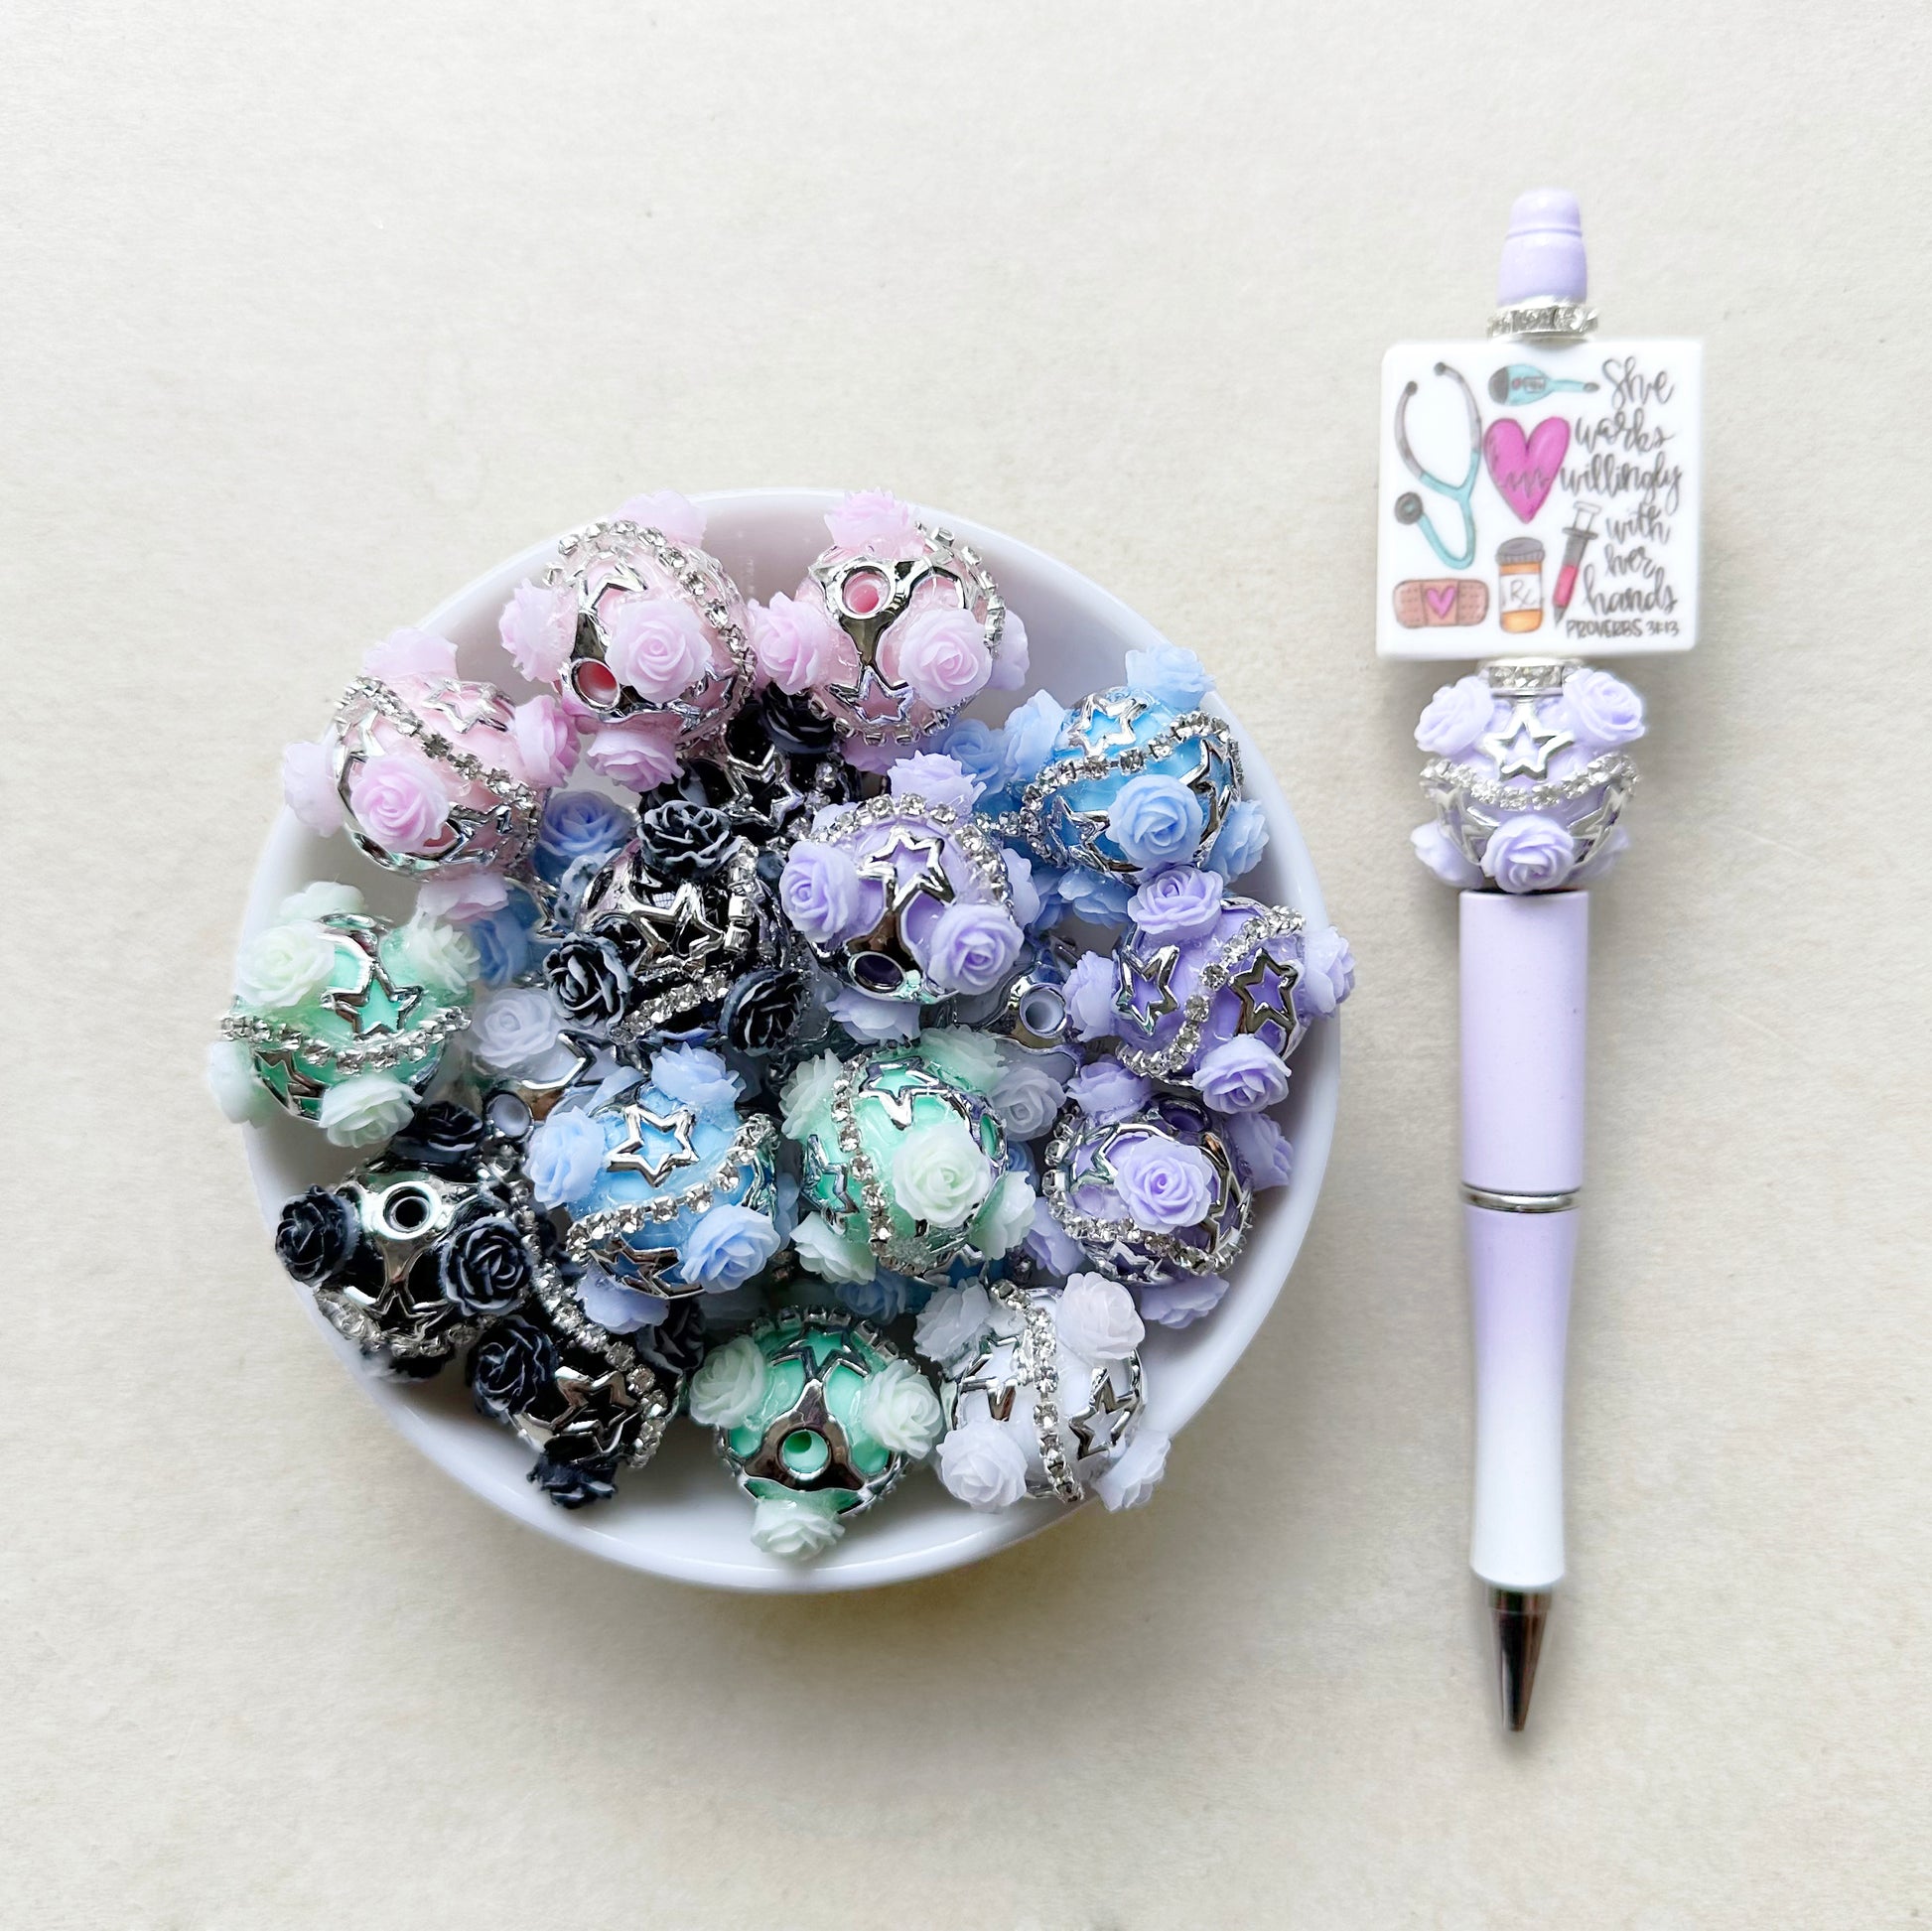 20mm Floral Beads, Fancy Beads For Pen